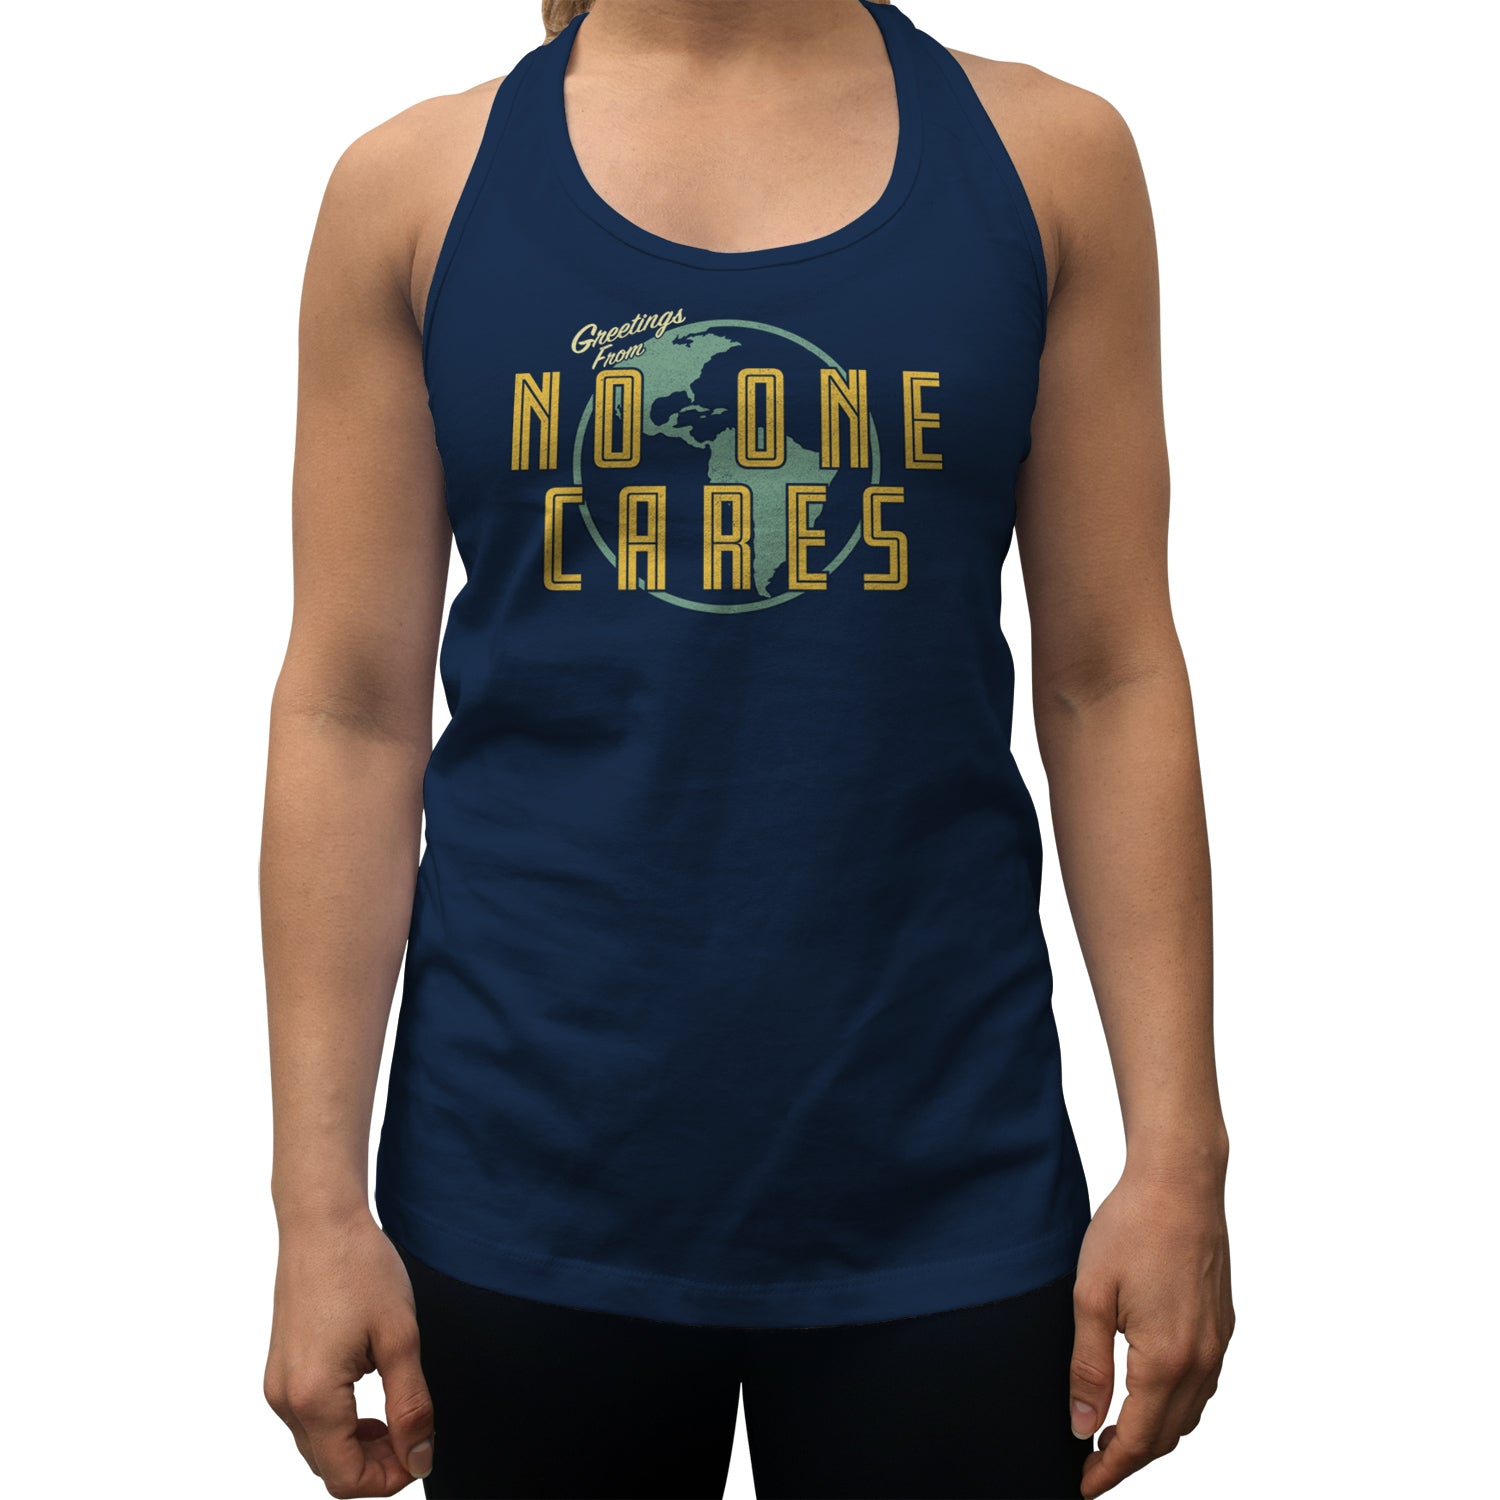 Women's Greetings From No One Cares Racerback Tank Top